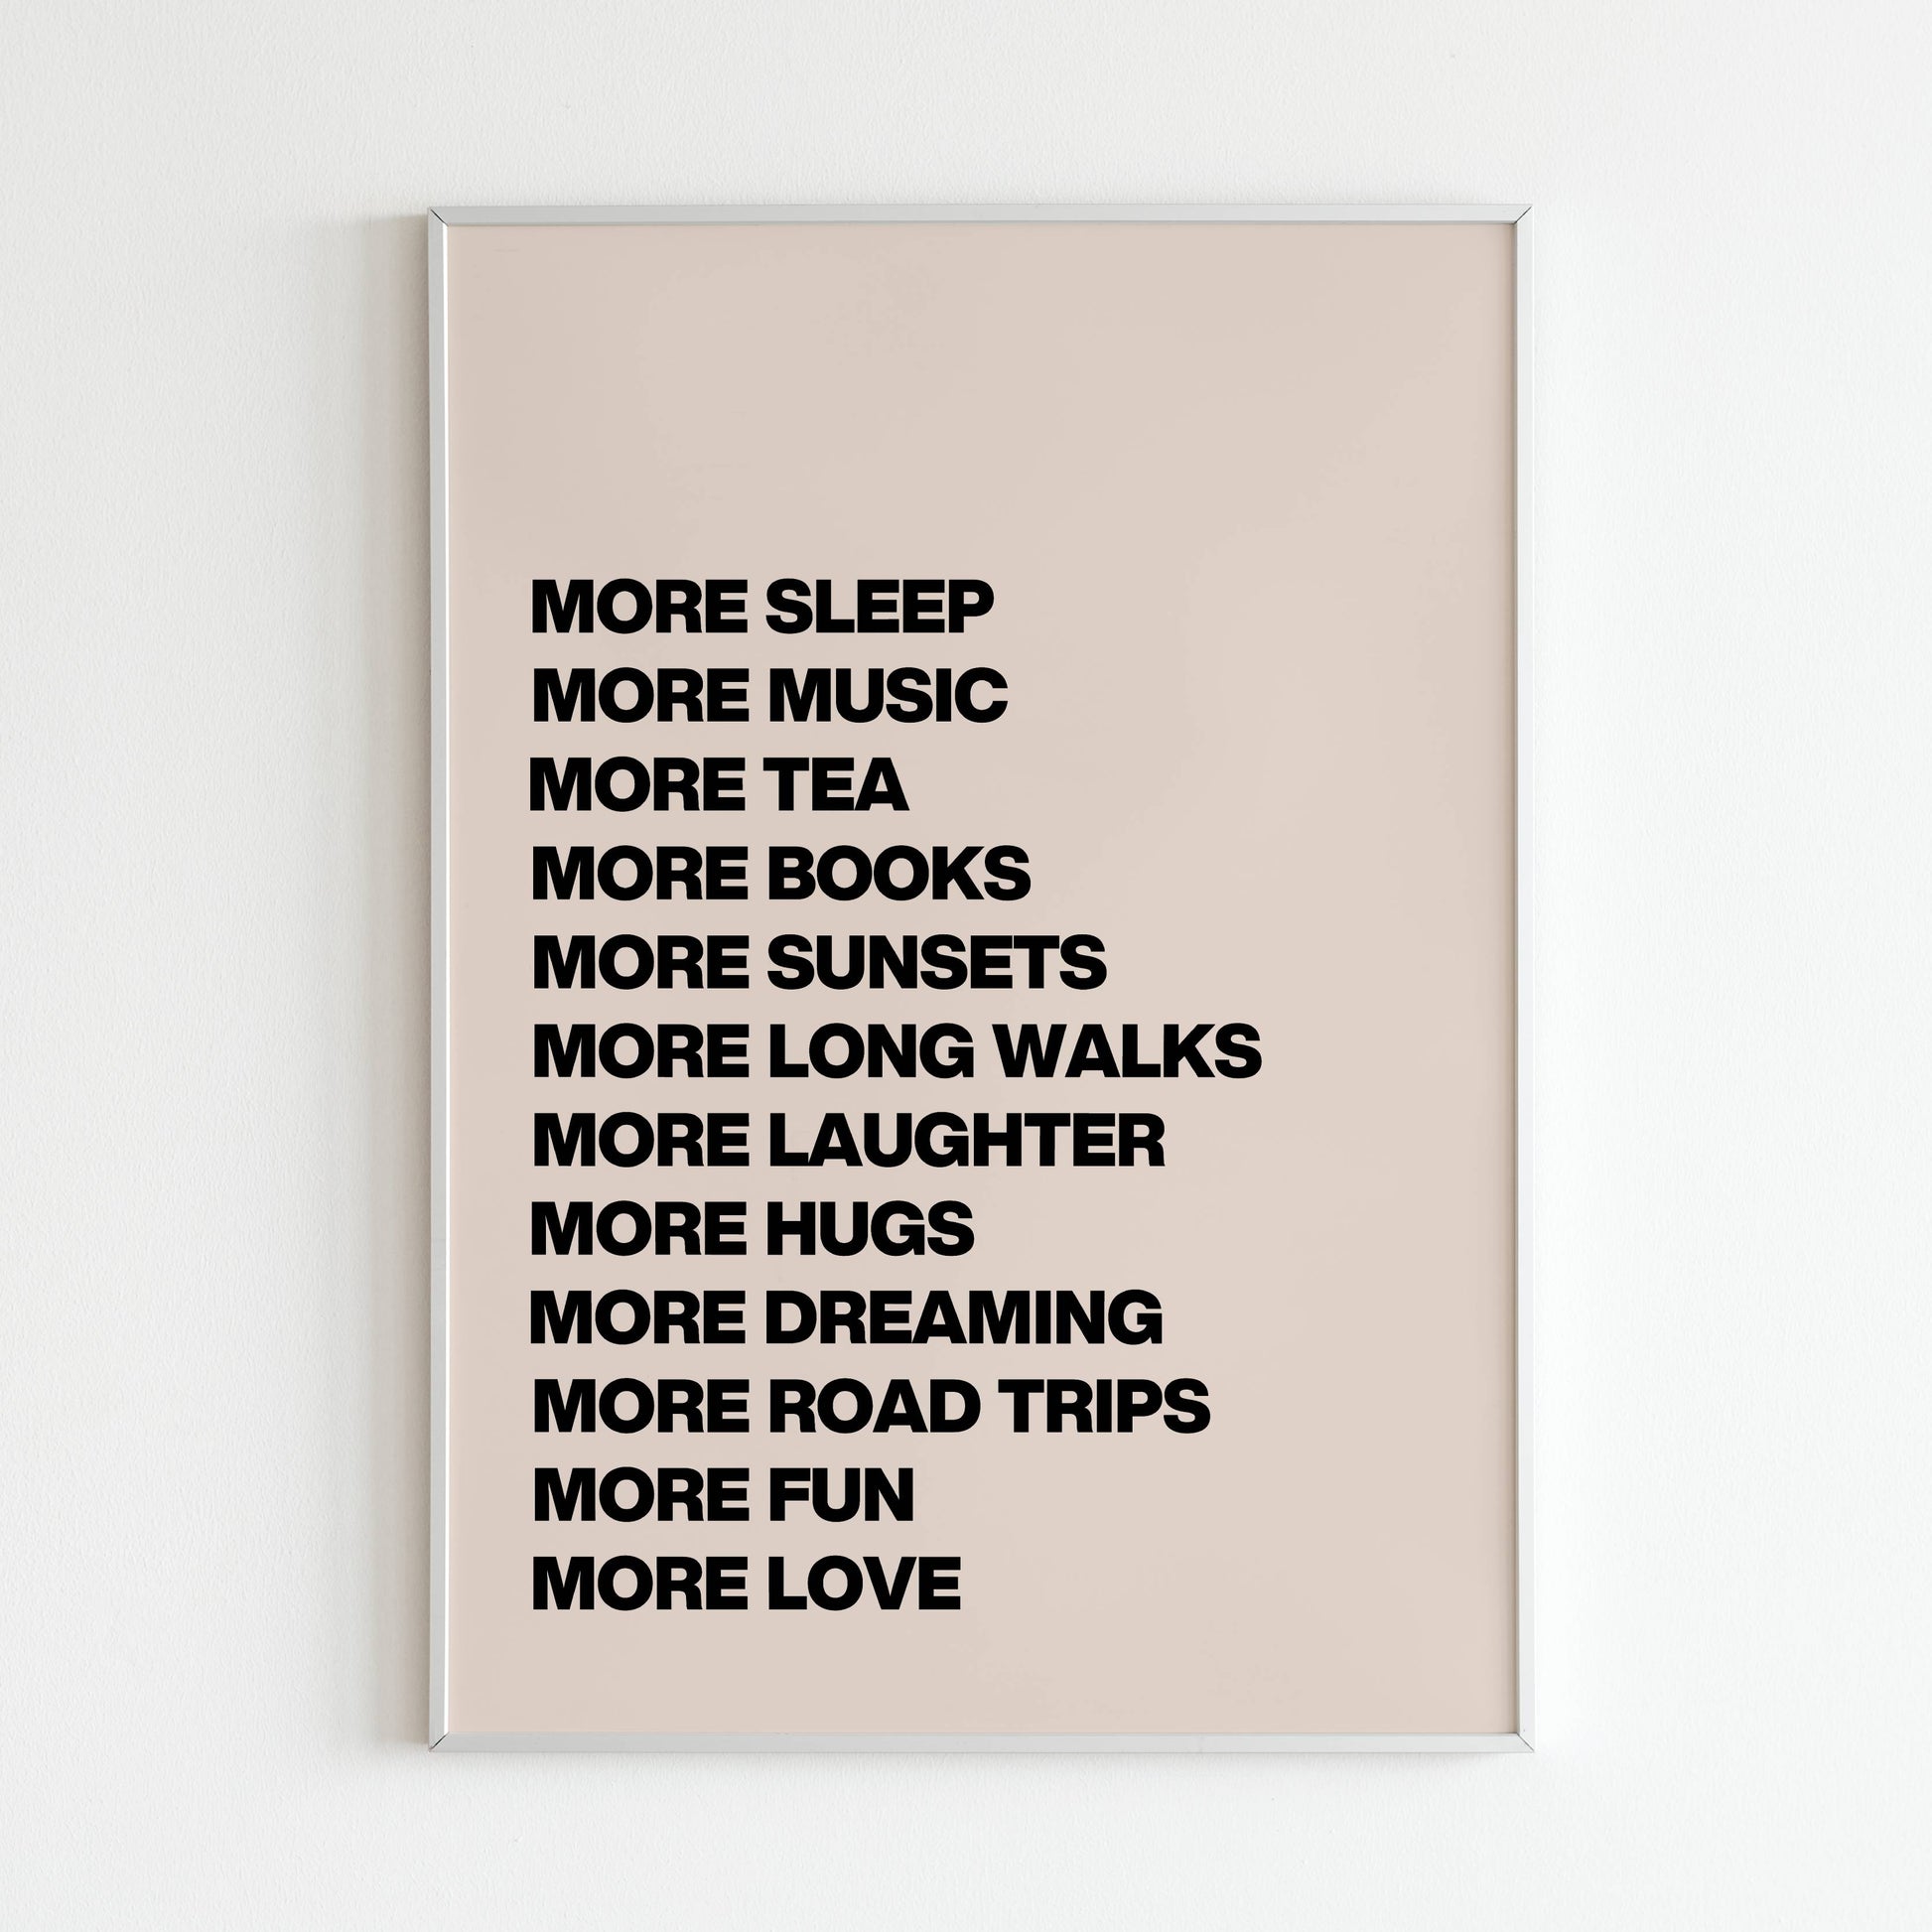 Downloadable typography wall art promoting relaxation and self-care